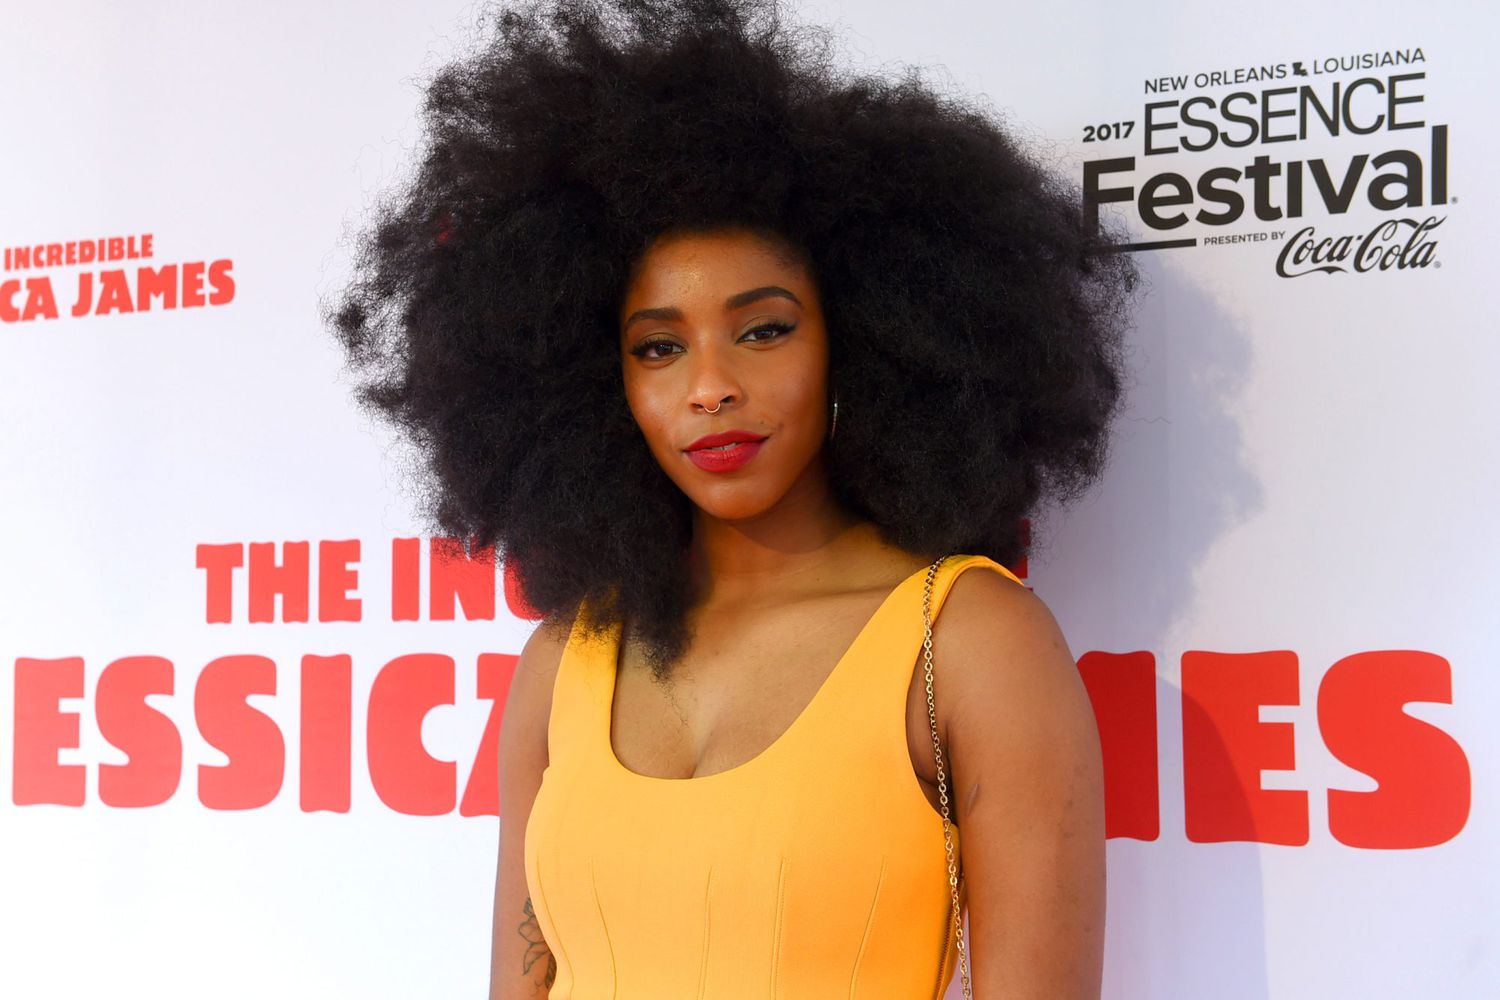 Premiere Of Netflix Original Film "The Incredible Jessica James" At The 2017 Essence Festival